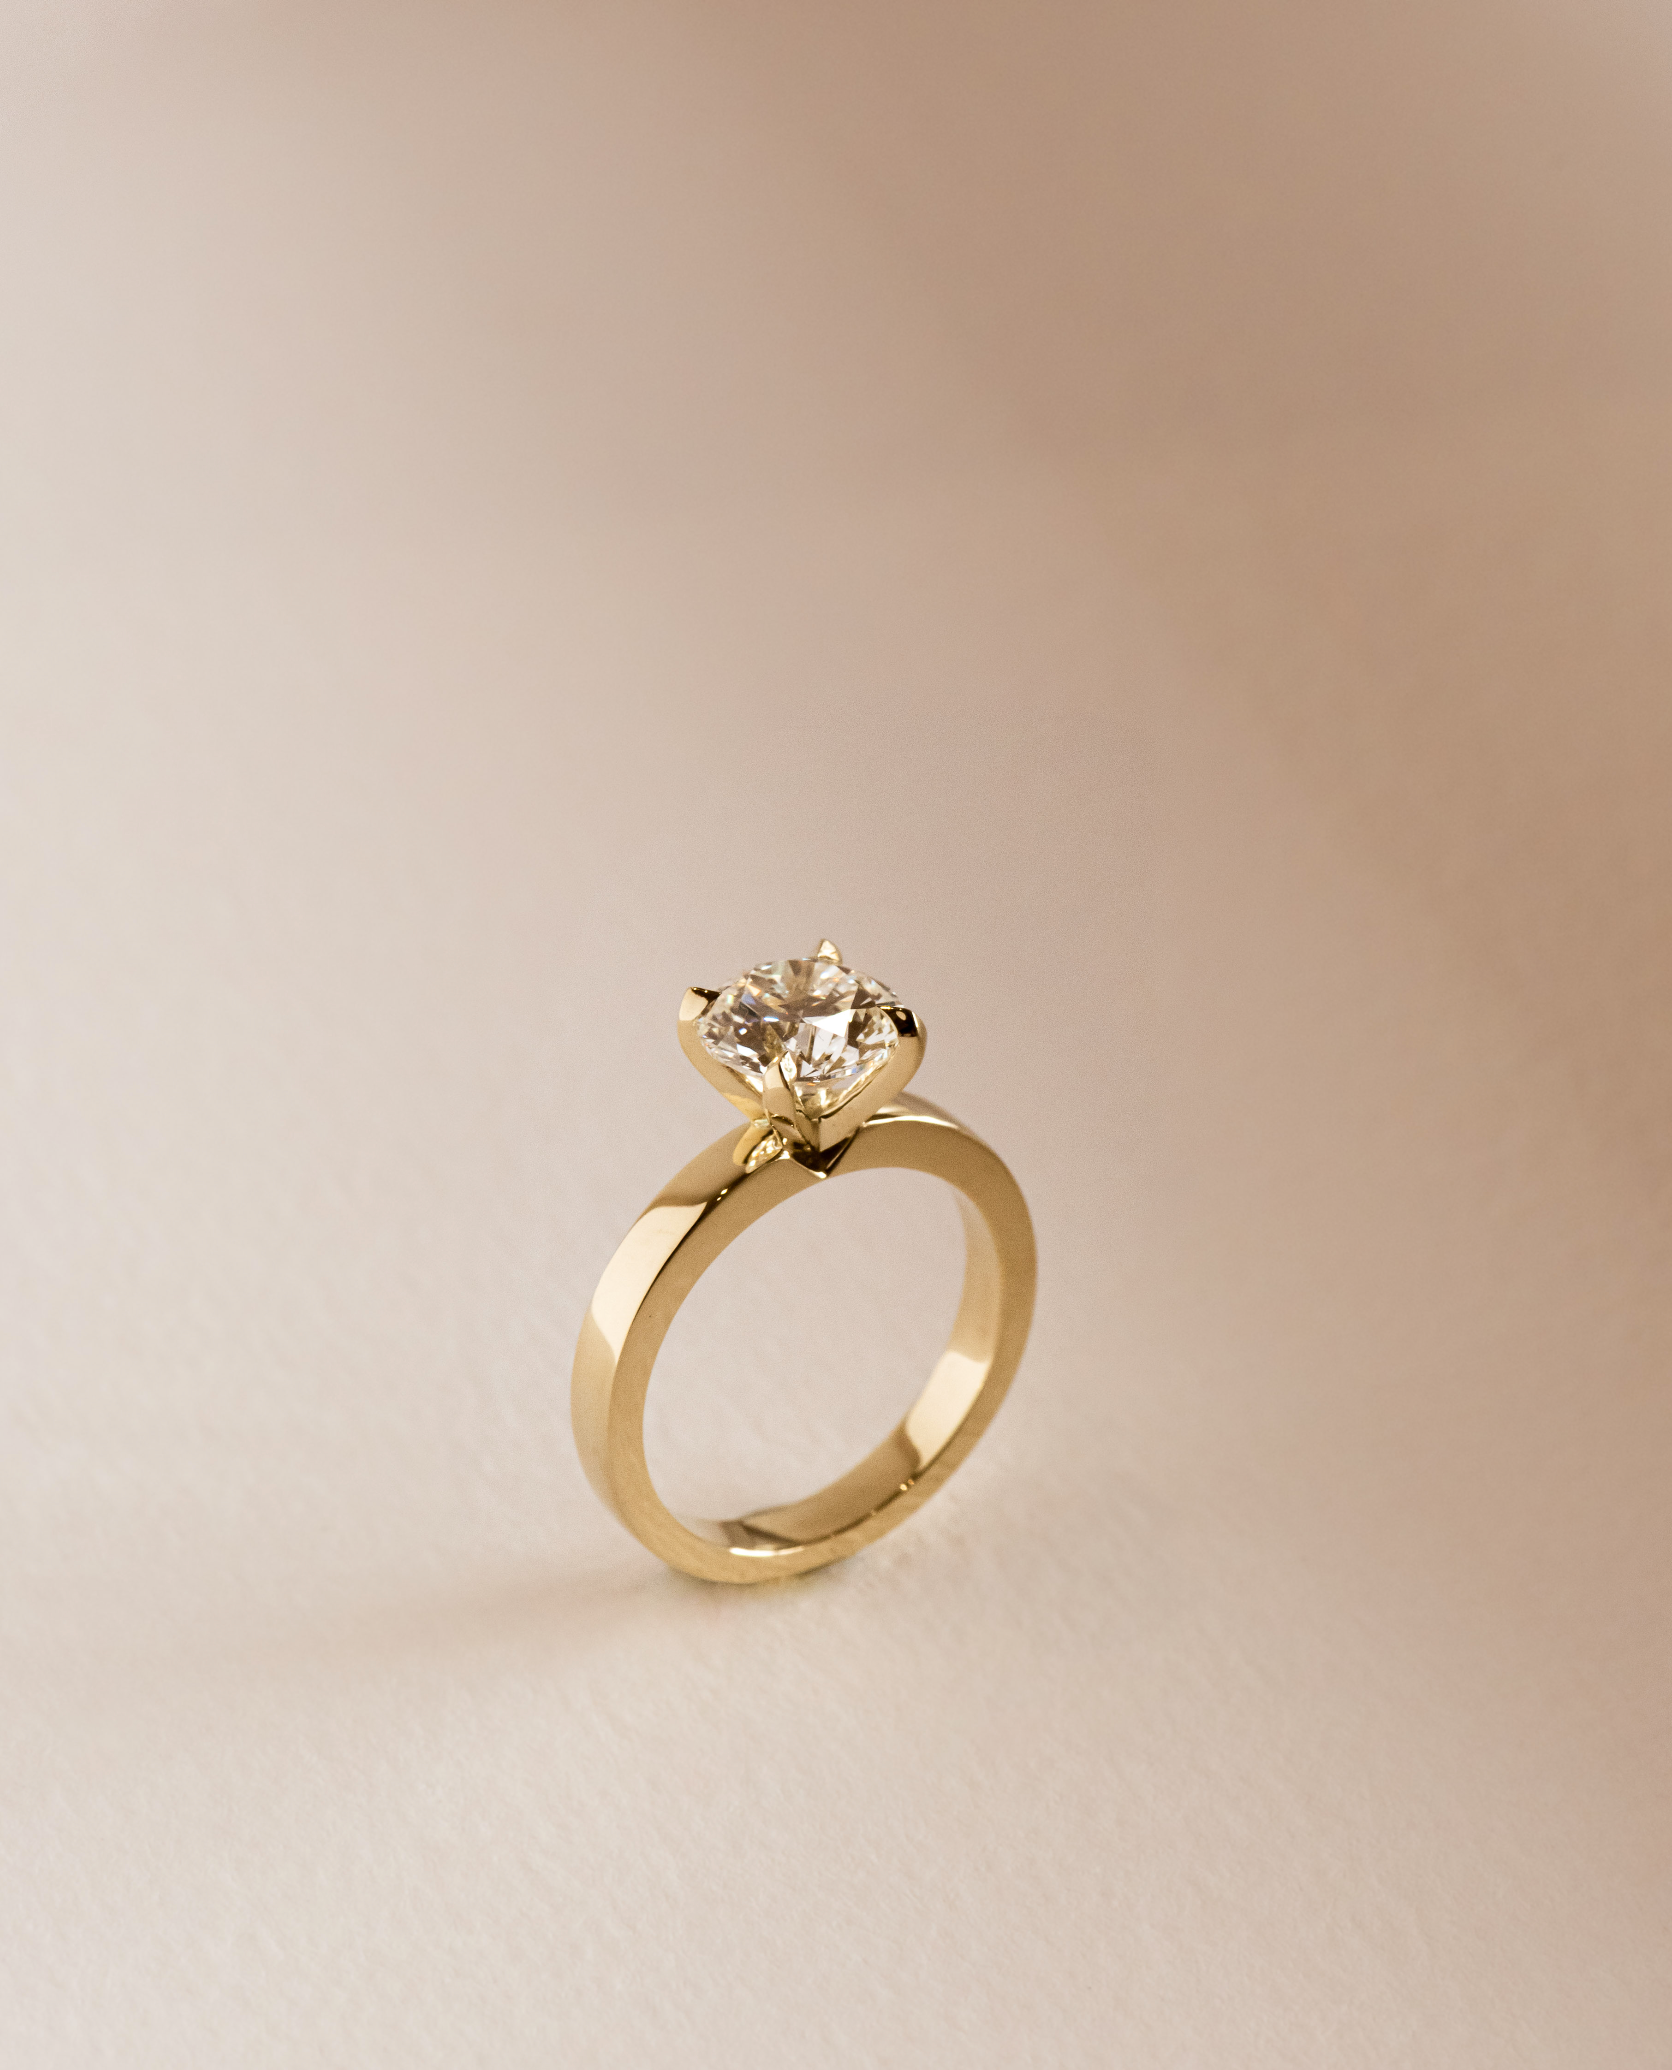 Round Diamond Solitaire Engagement Ring - Four Claw Setting in Yellow Gold